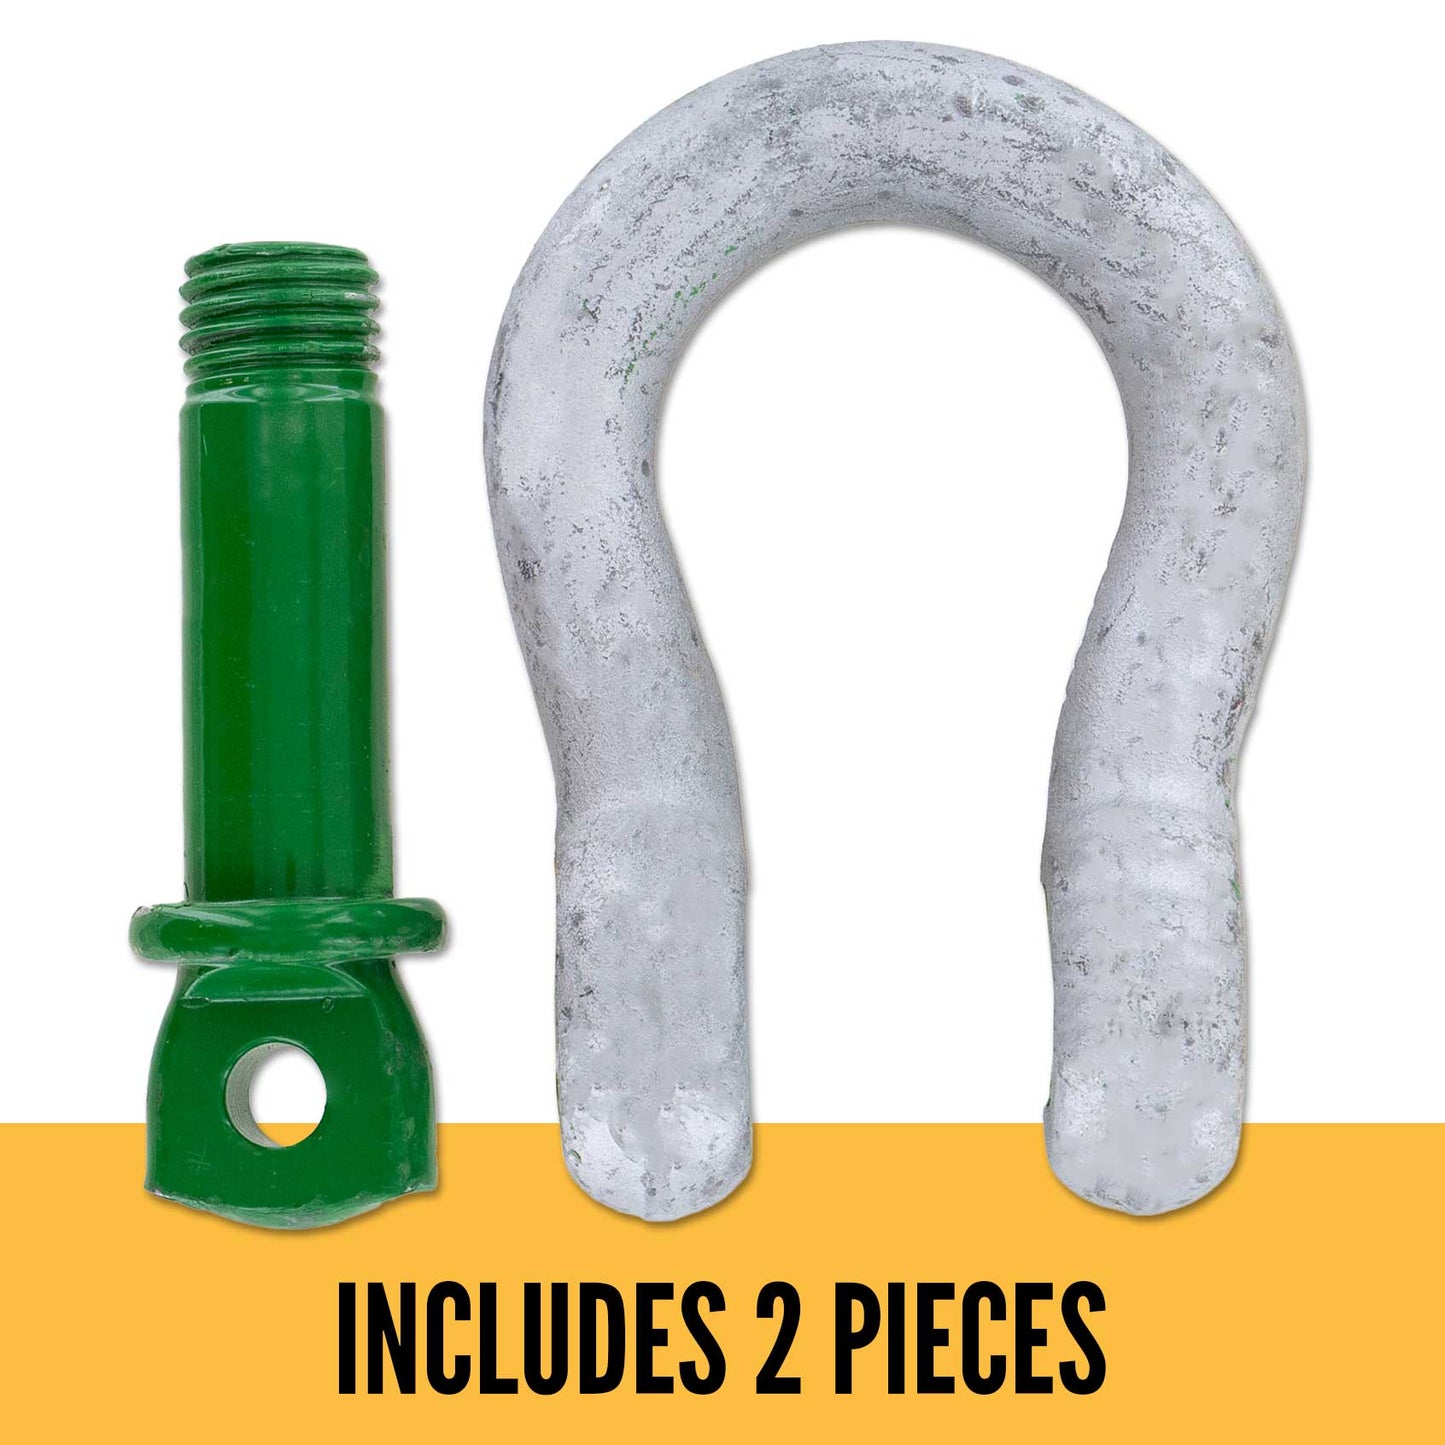 3/16" Van Beest Green Pin® Screw Pin Anchor Shackle | G-4161 - 0.33 Ton parts of a shackle